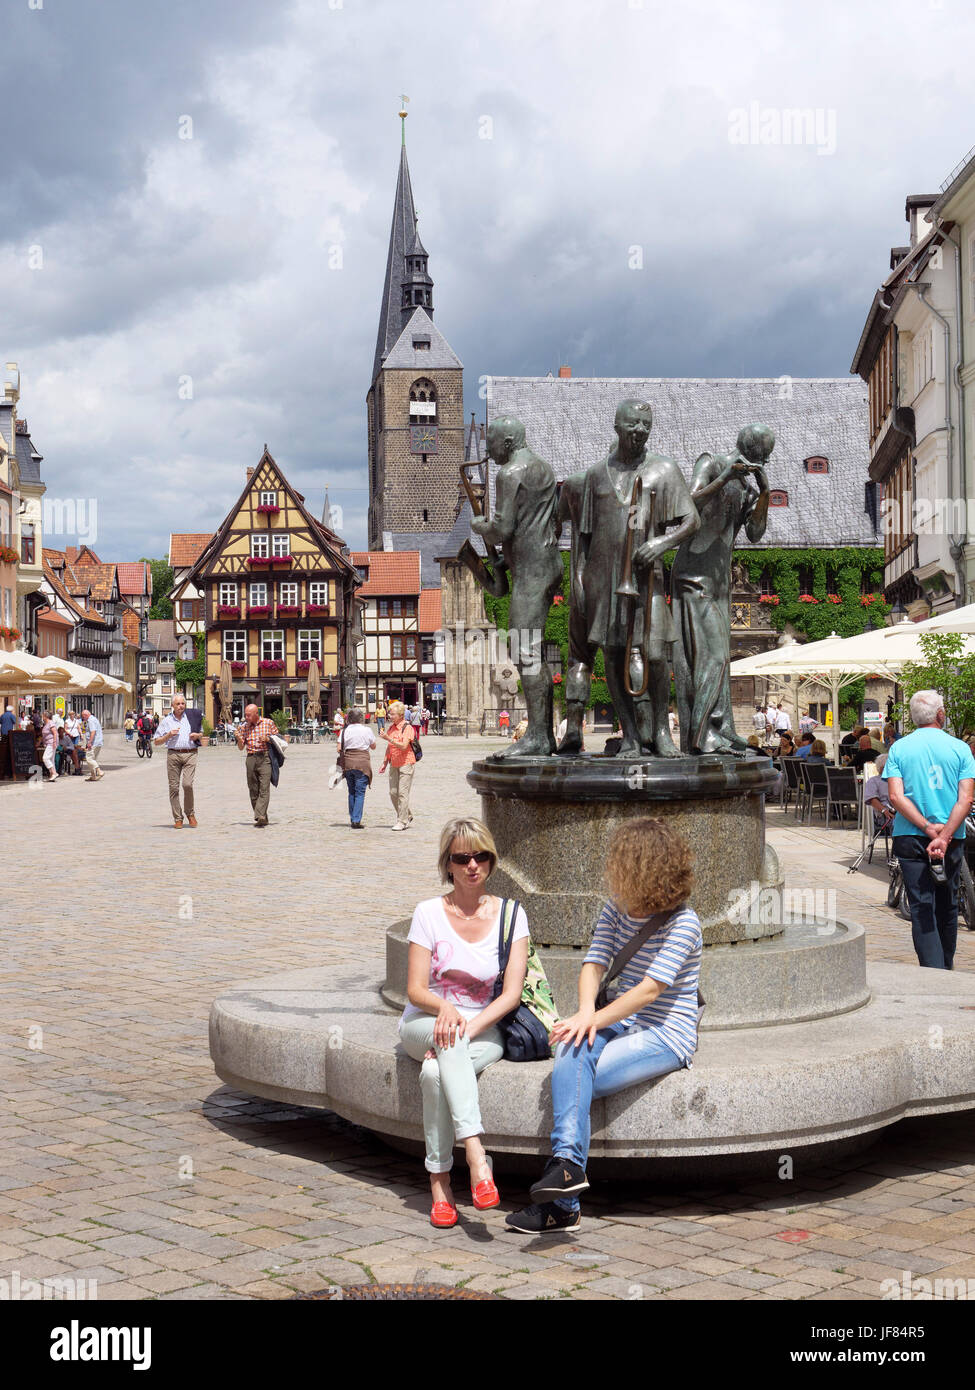 fountain, townhall and halftimbered house at Markt square, Quedlinburg, Saxony-Anhalt, Germany, Europe, UNESCO worl heritage Stock Photo